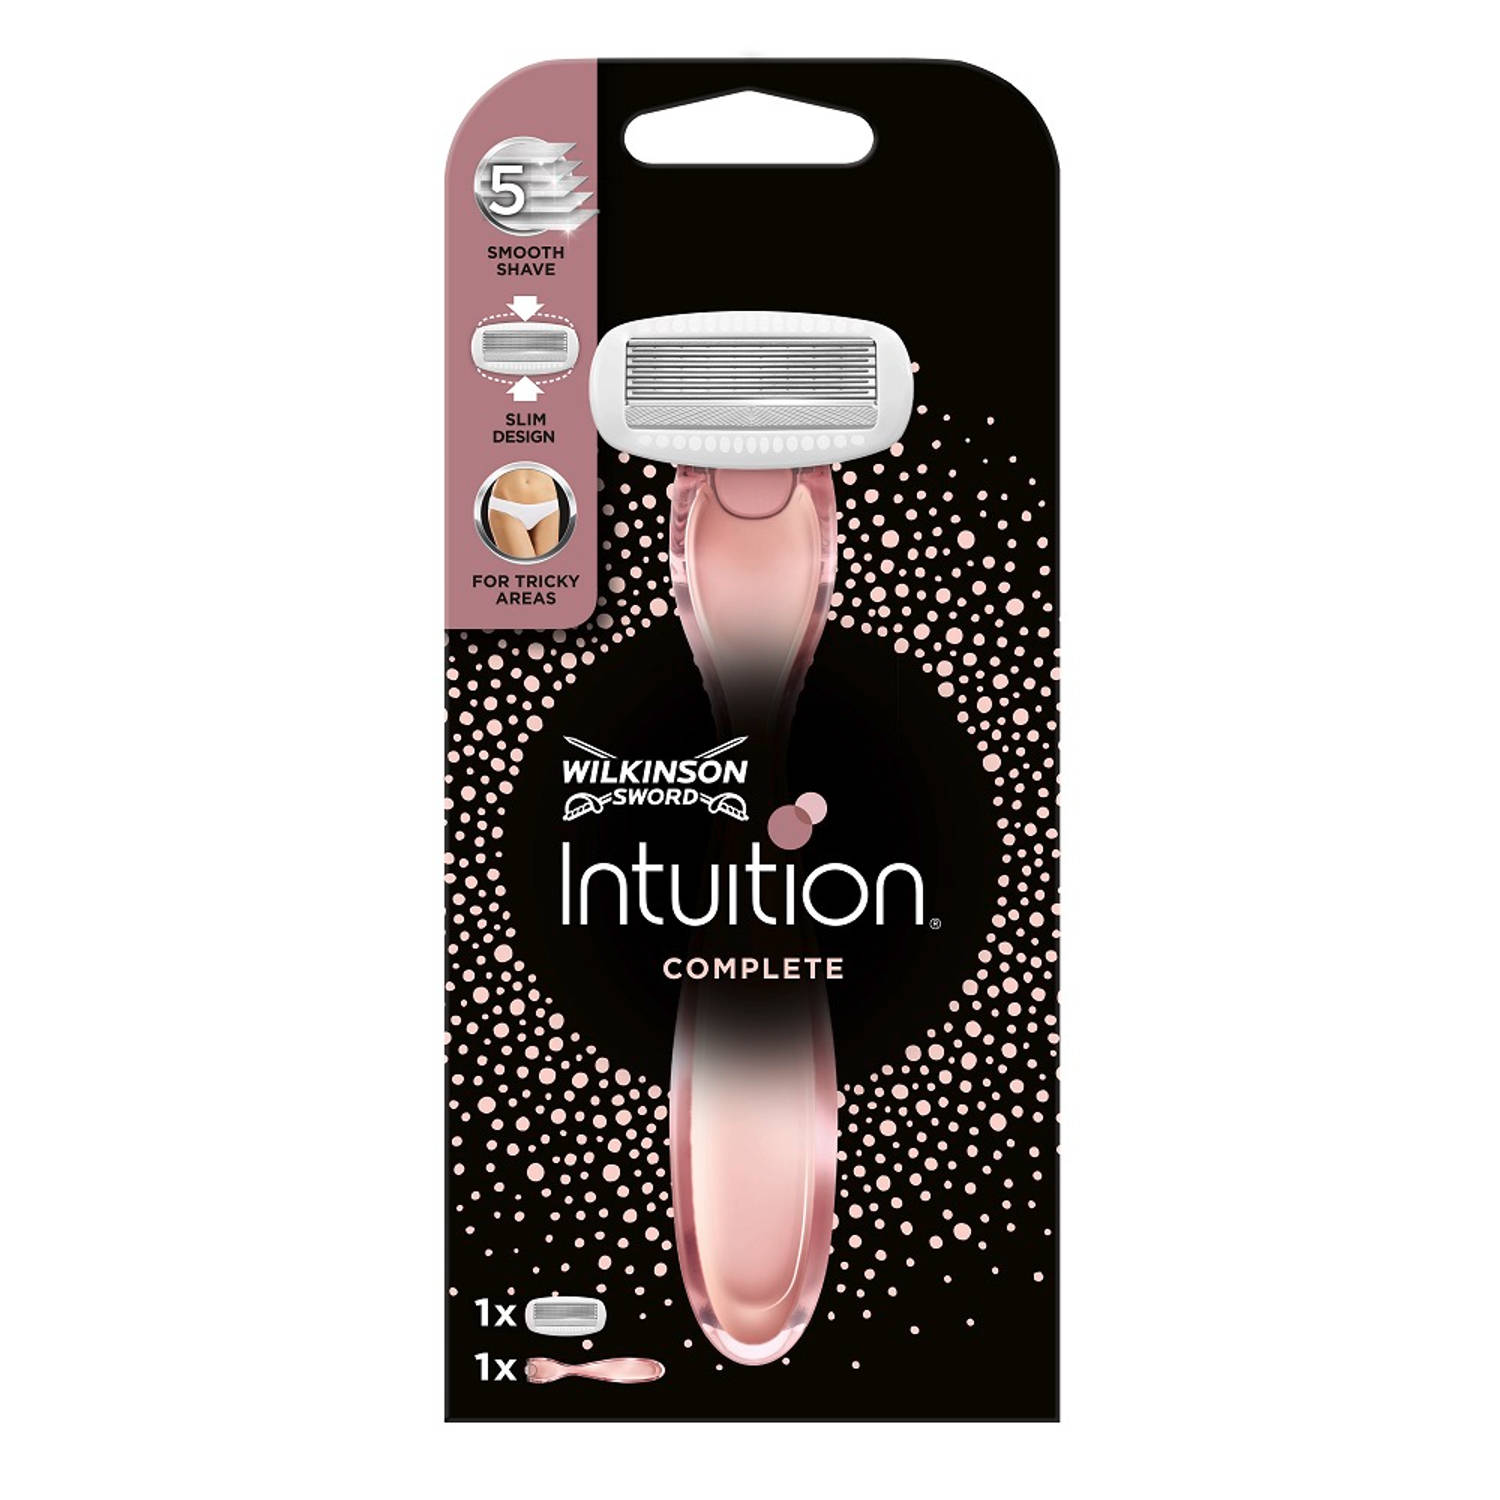 WILKINSON intuition complete app 1st